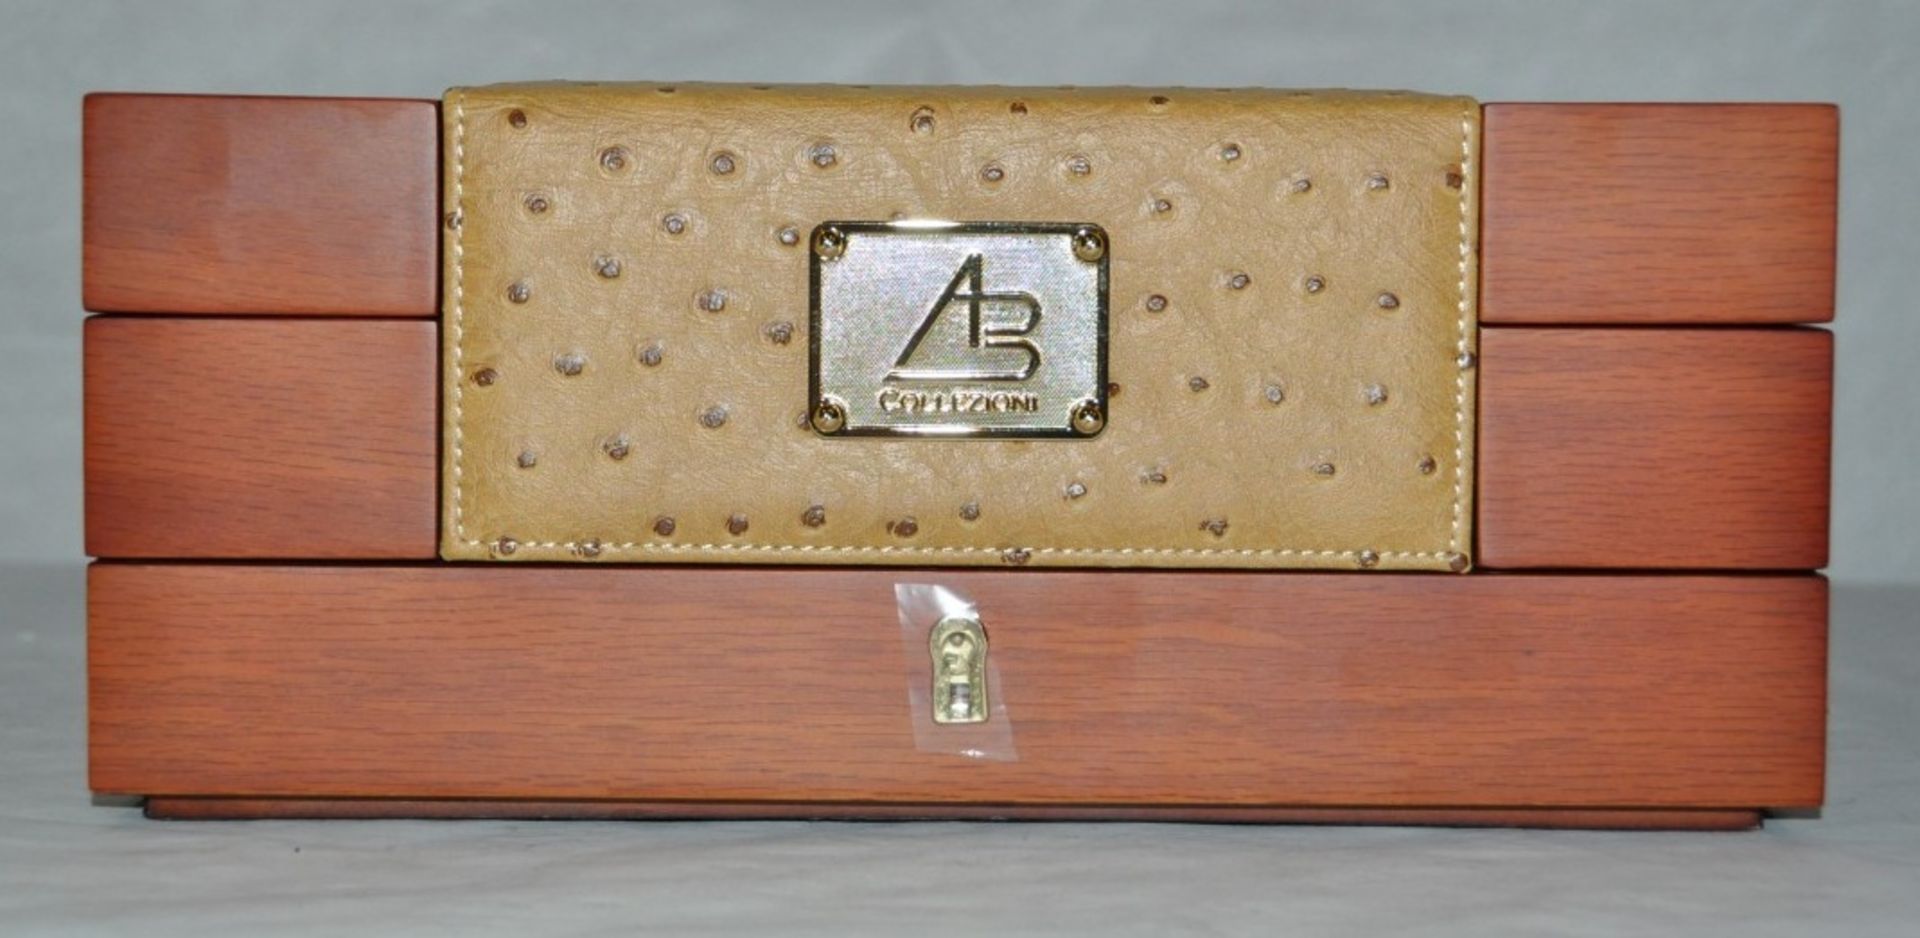 1 x "AB Collezioni" Italian Luxury Jewellery Box (WC112W) - Ref LT112  – Made From Cherry Wood - - Image 4 of 6